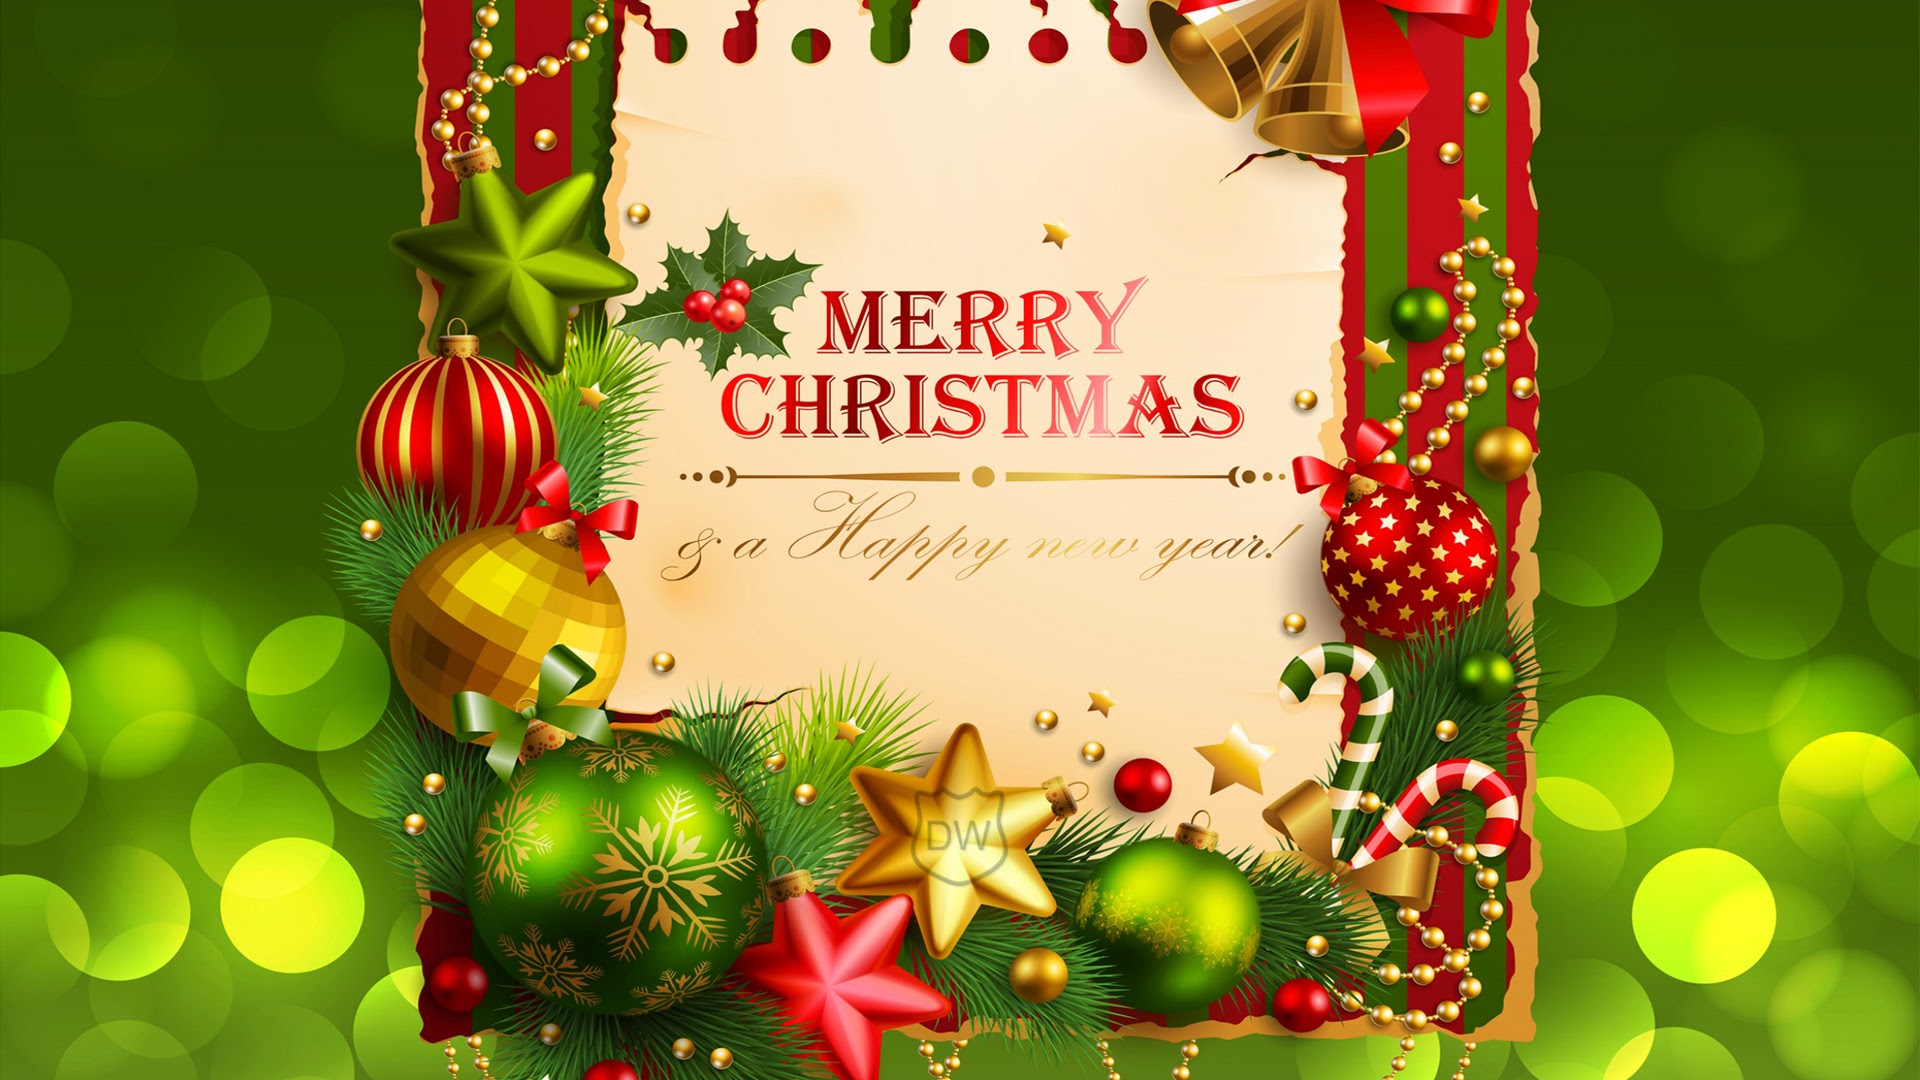 Merry Christmas Wallpaper Red Free Download